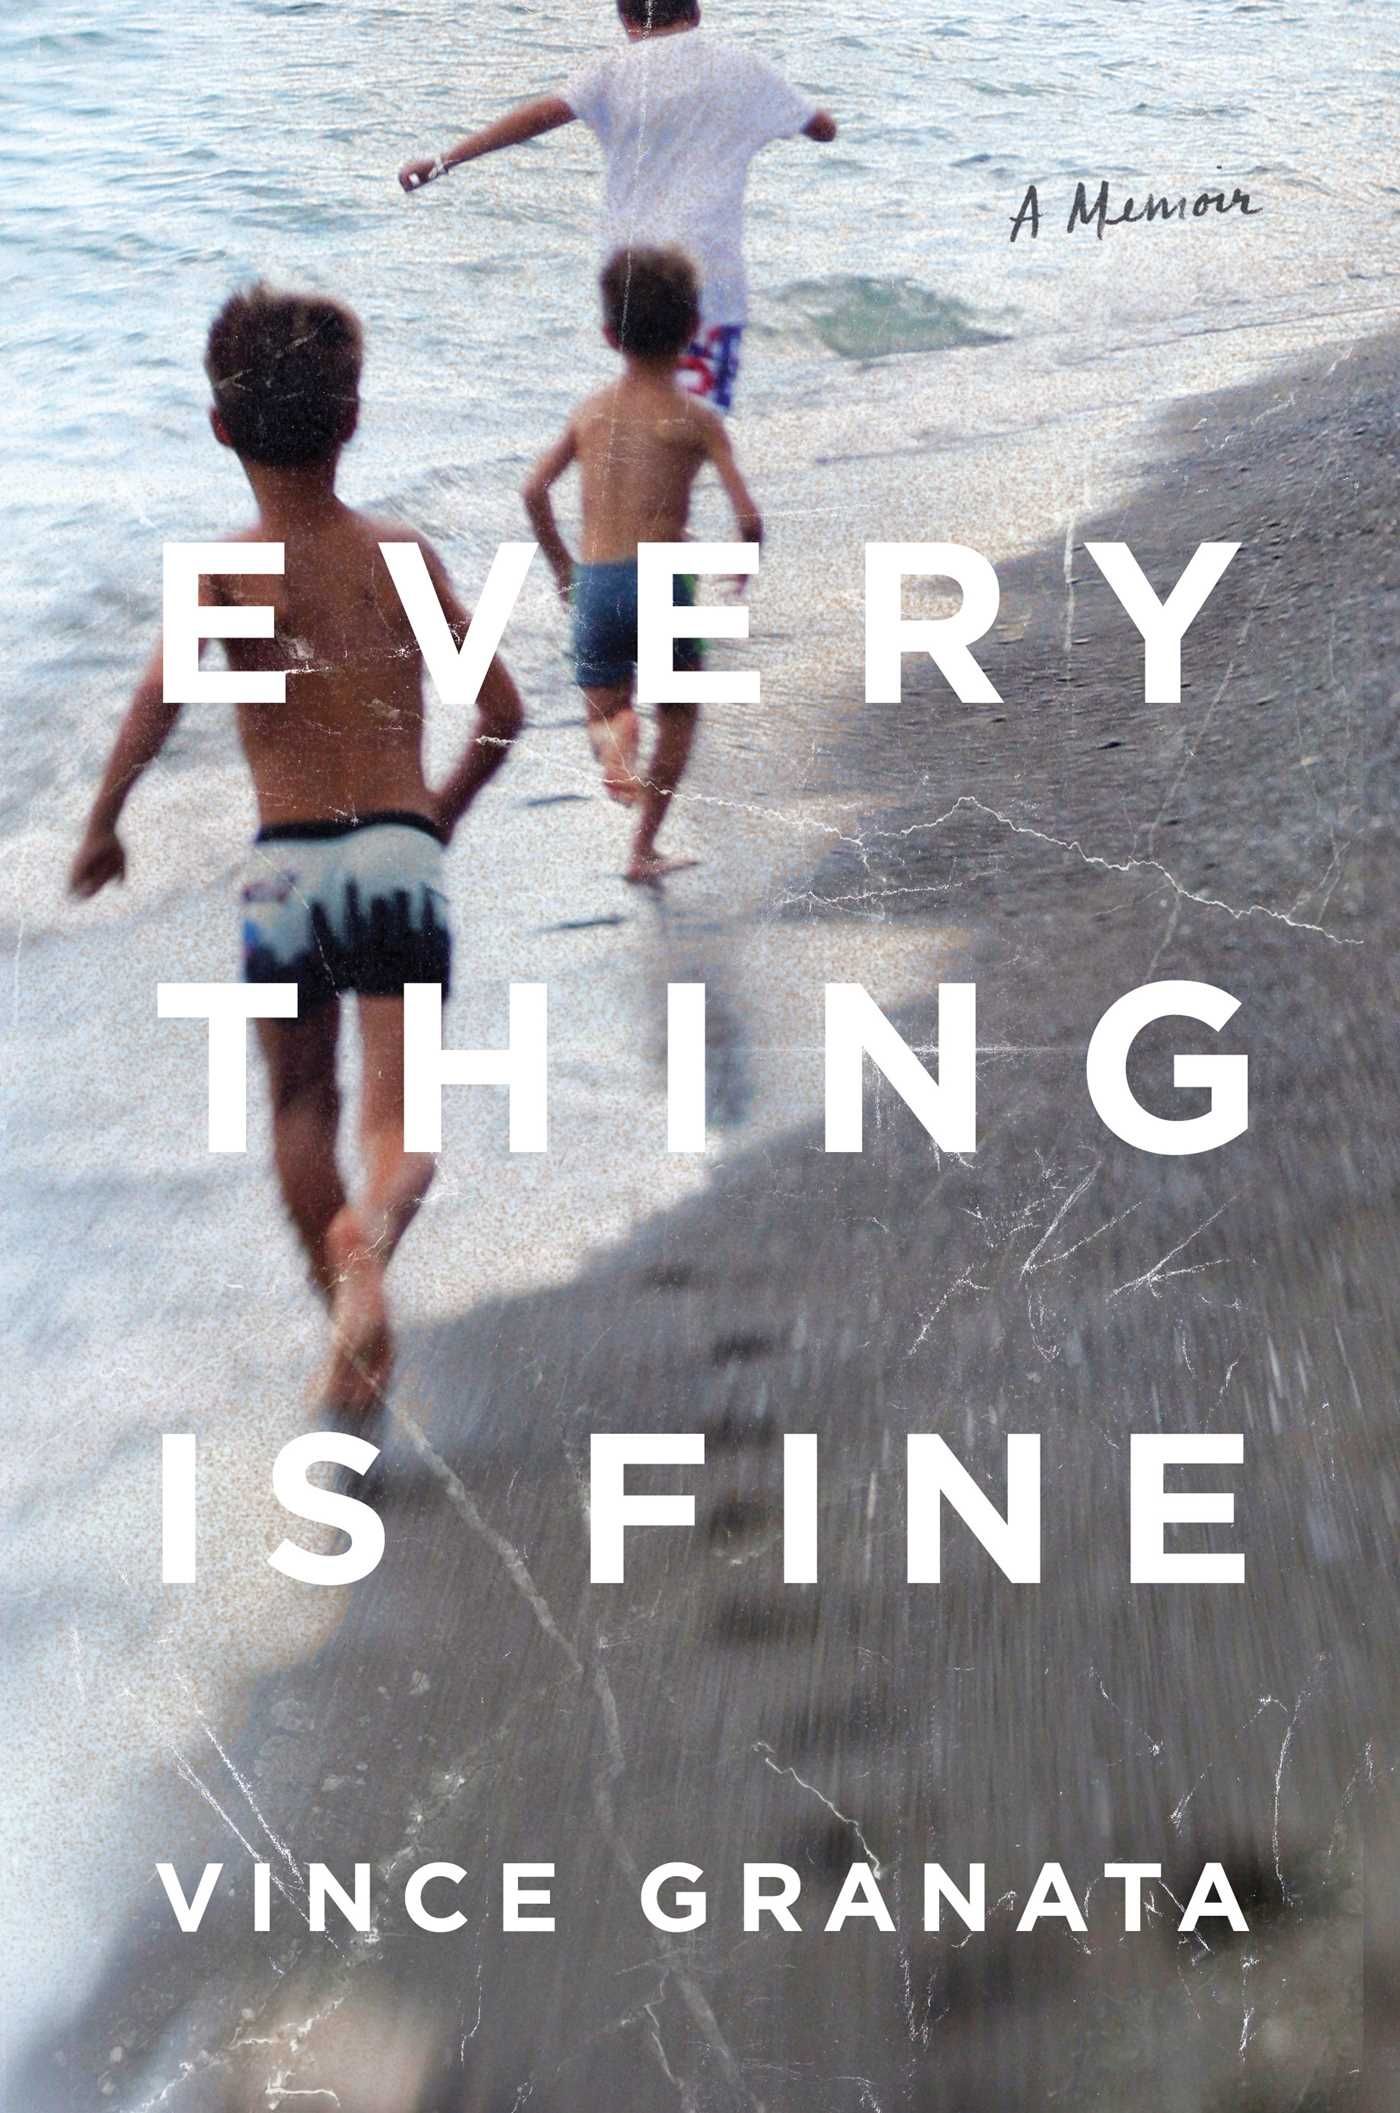 Book cover of Everything is Fine by Vince Granata: two children in swim trunks running on a beach